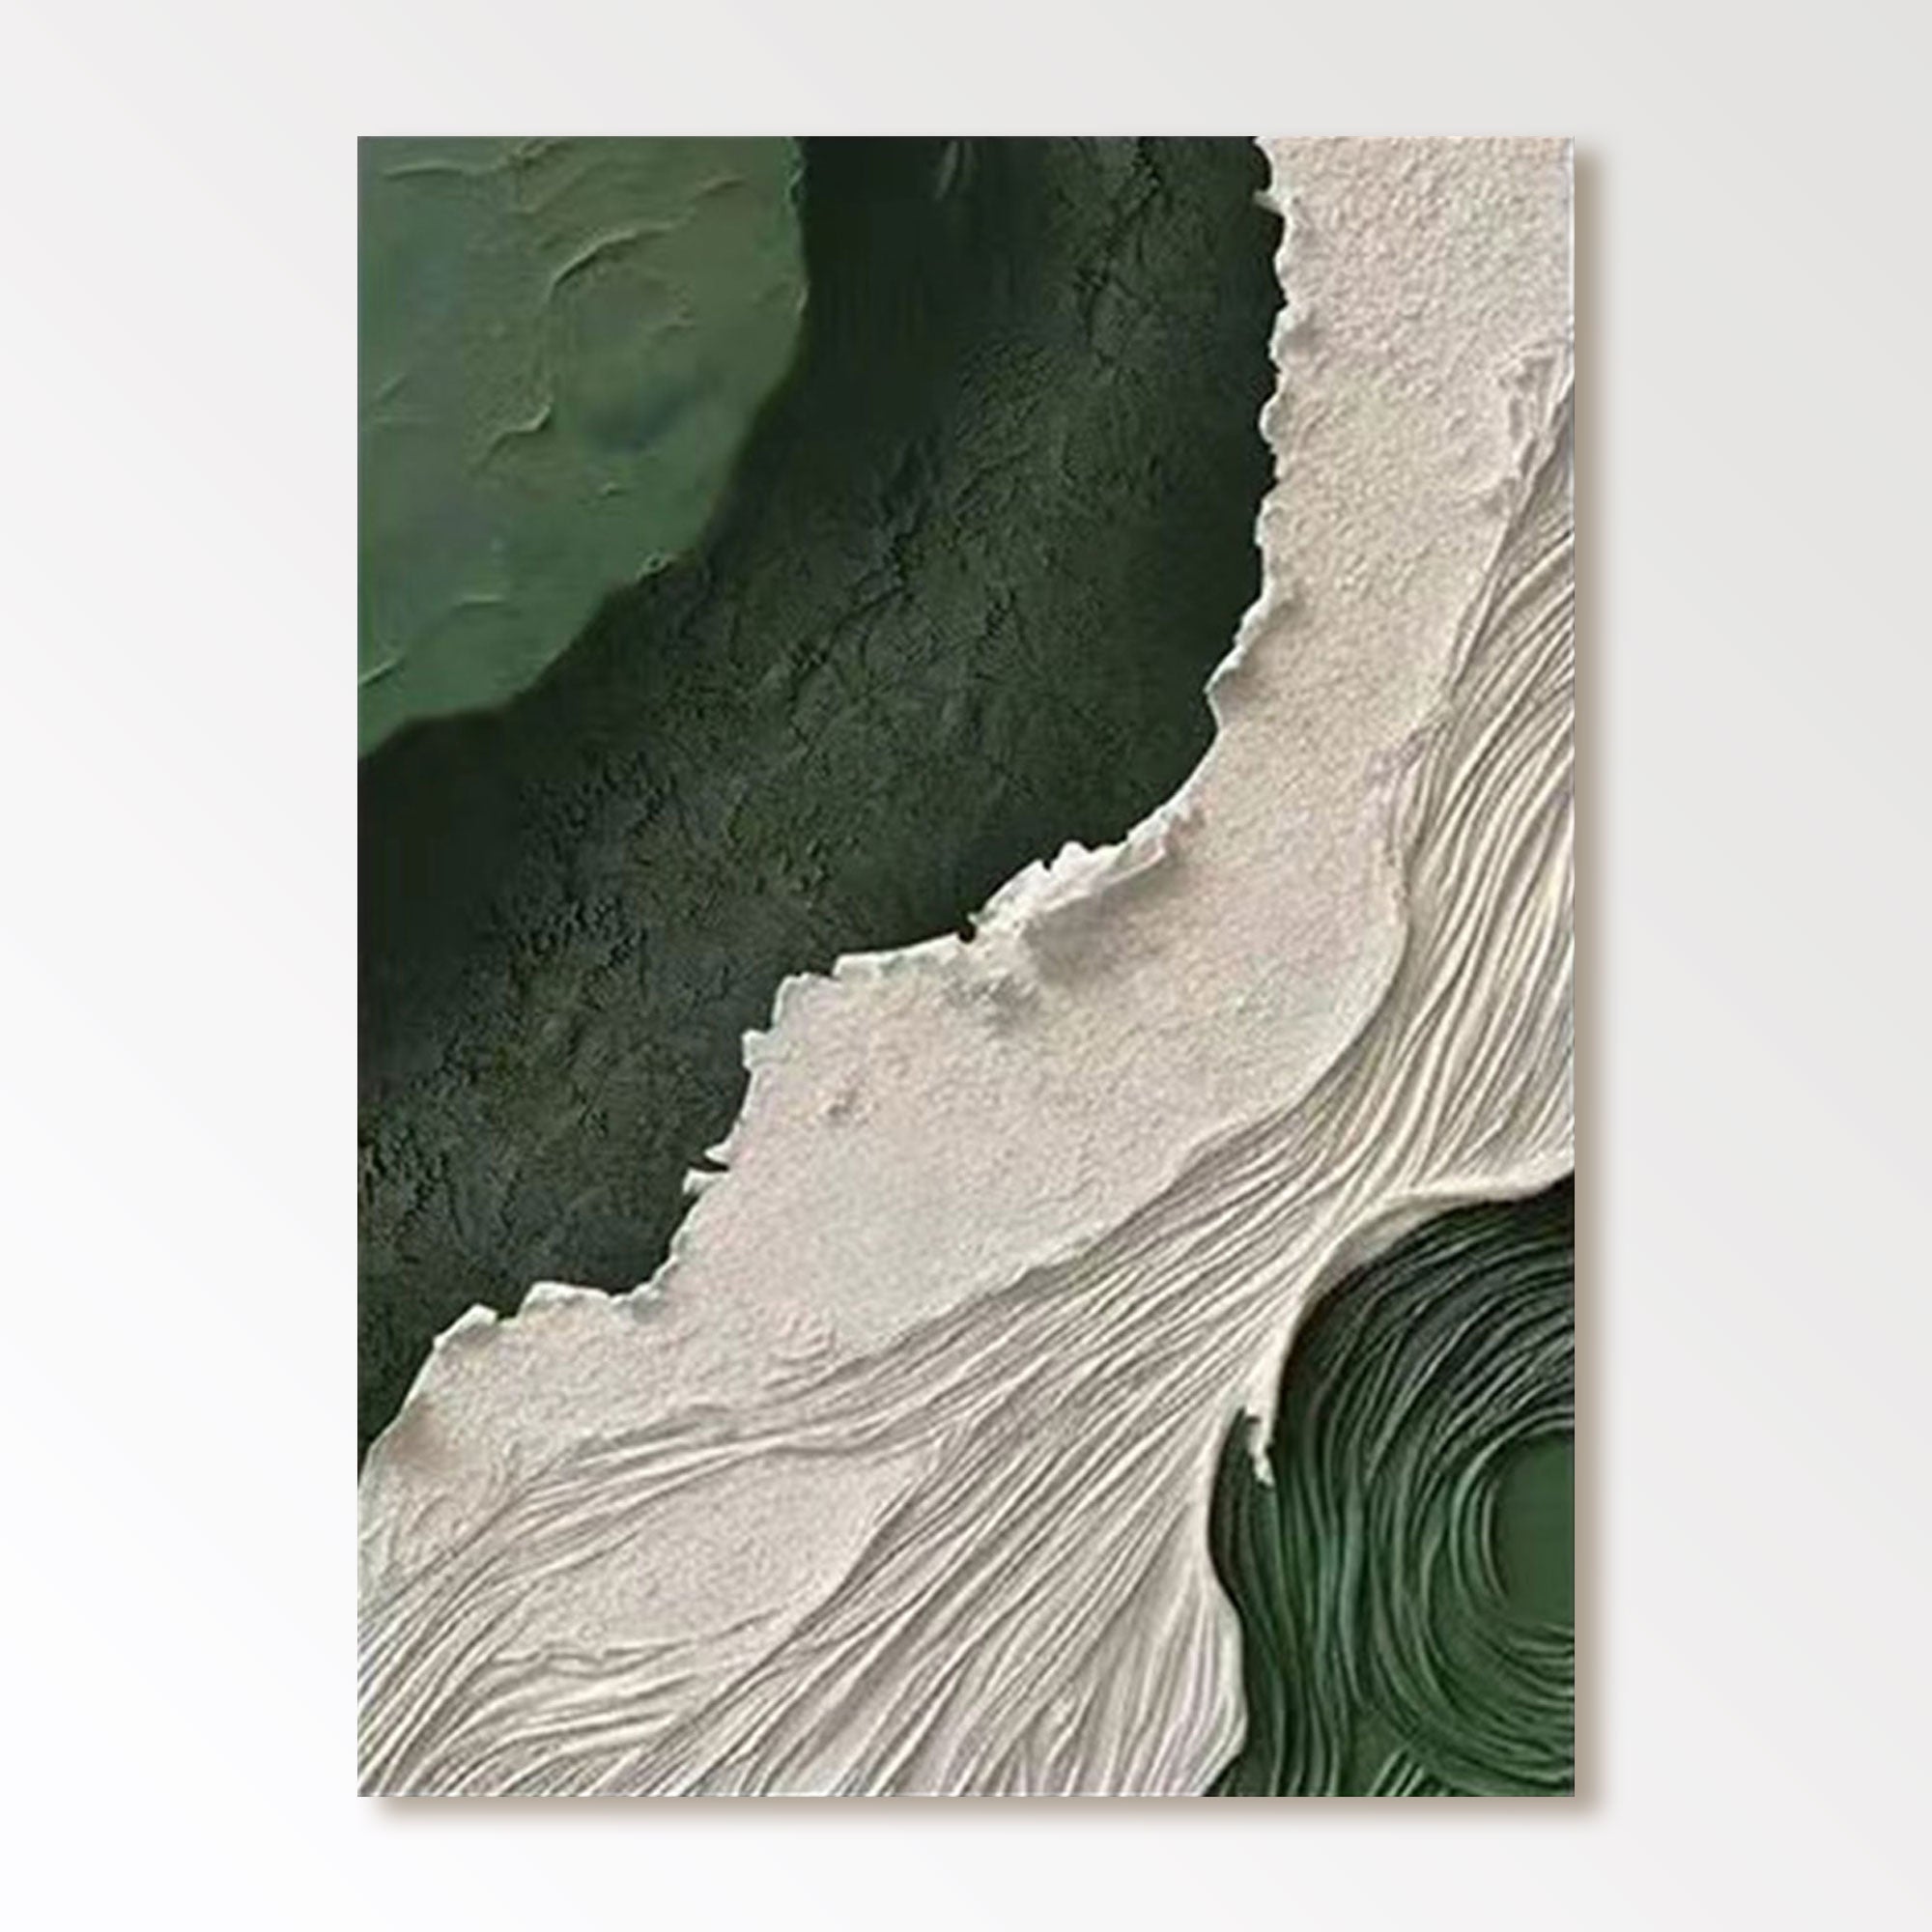 Plaster Painting “Confluence"